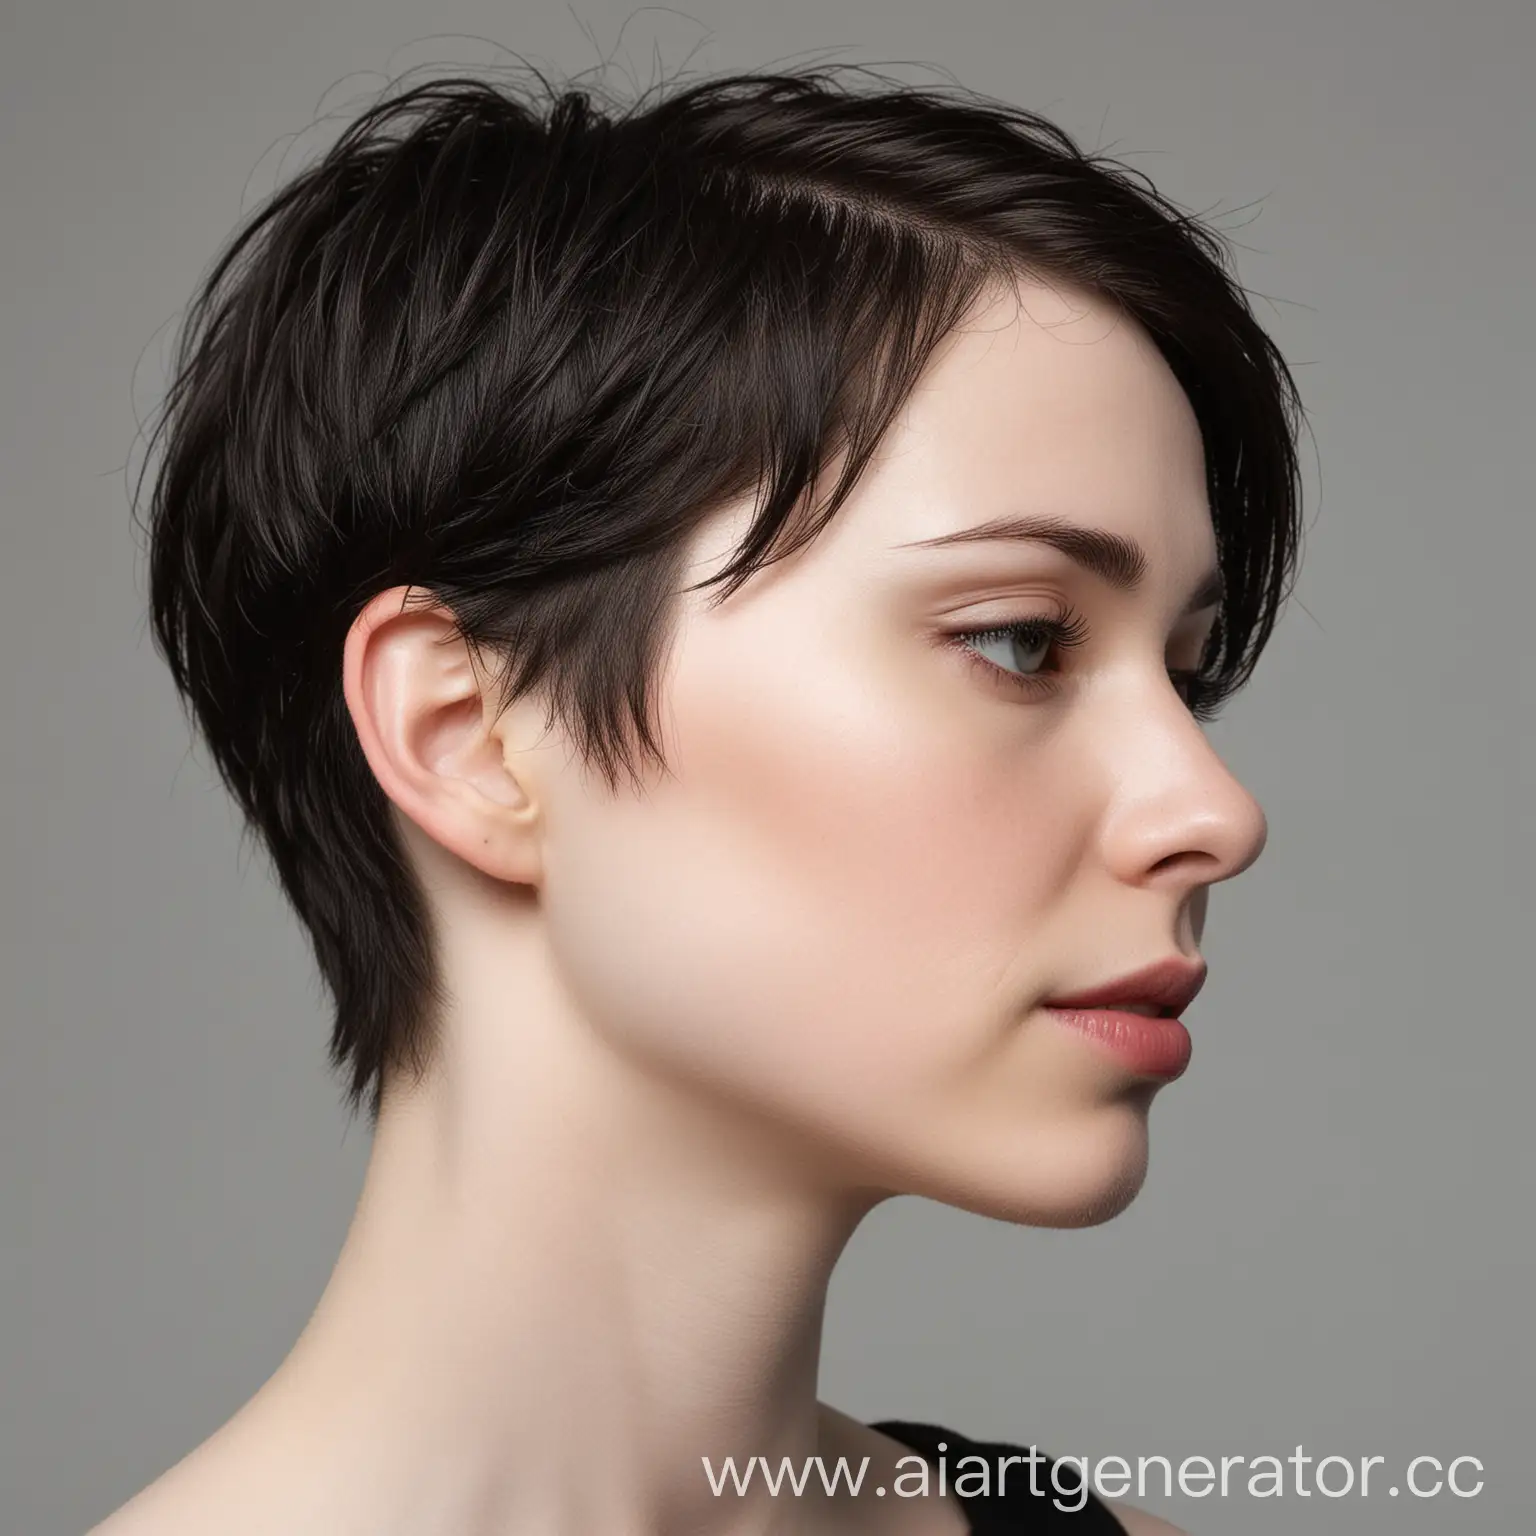 Portrait-of-PaleSkinned-Individual-with-Dark-Hair-on-White-Background